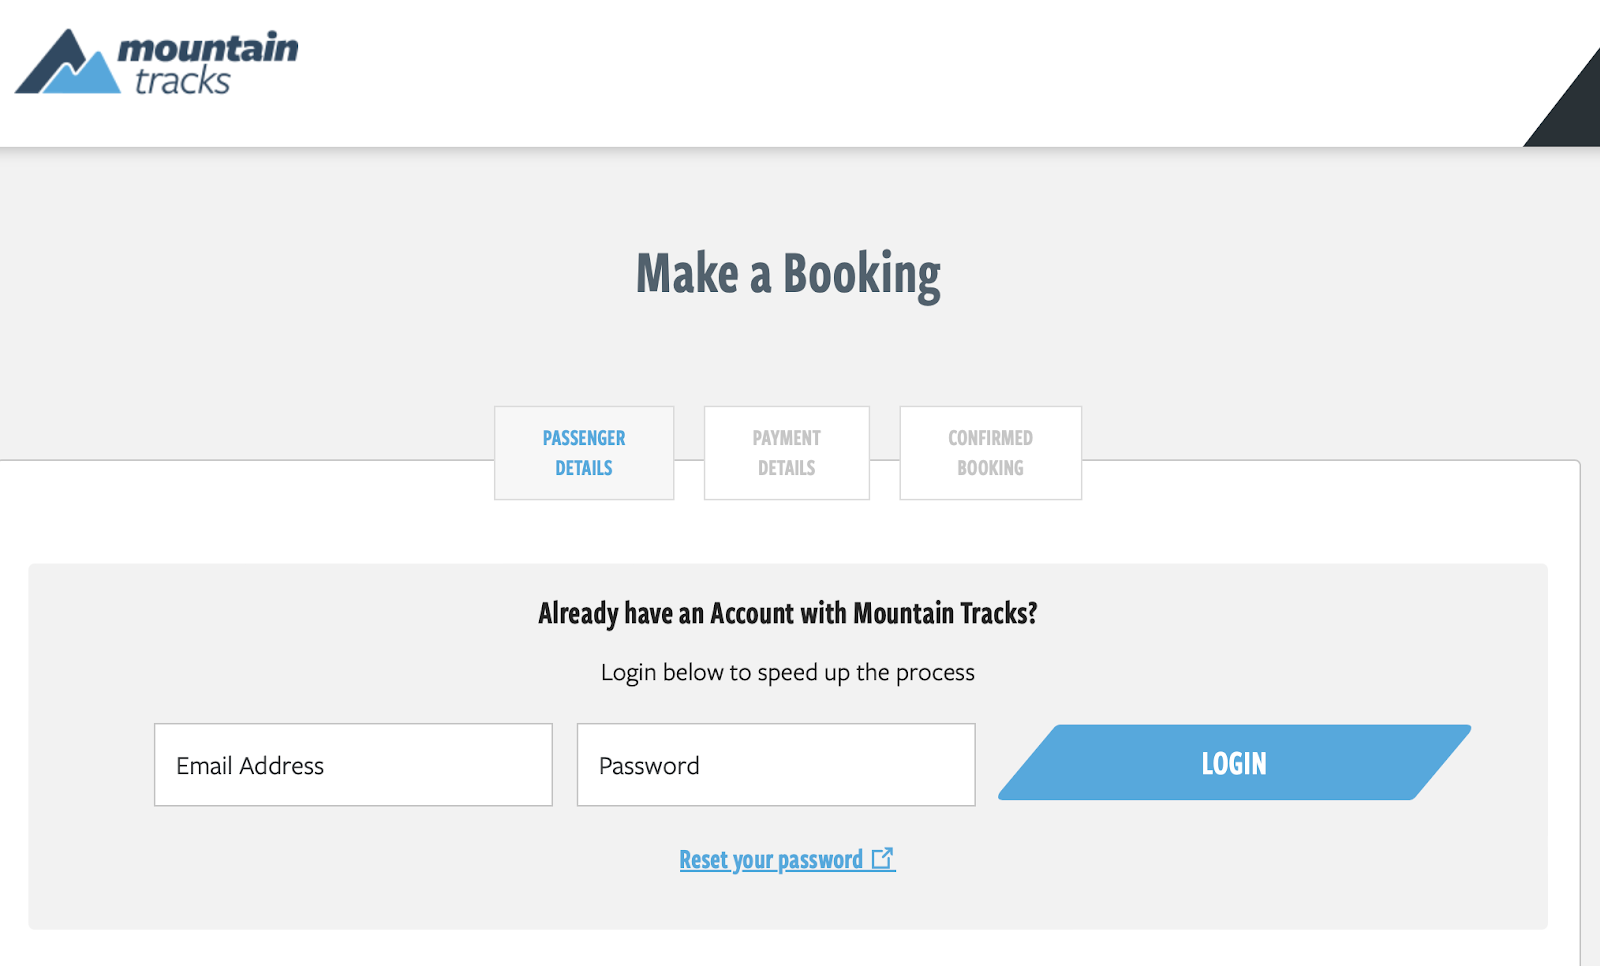 A screenshot from the Mountain Tracks website showing a 'Make a booking’ page.